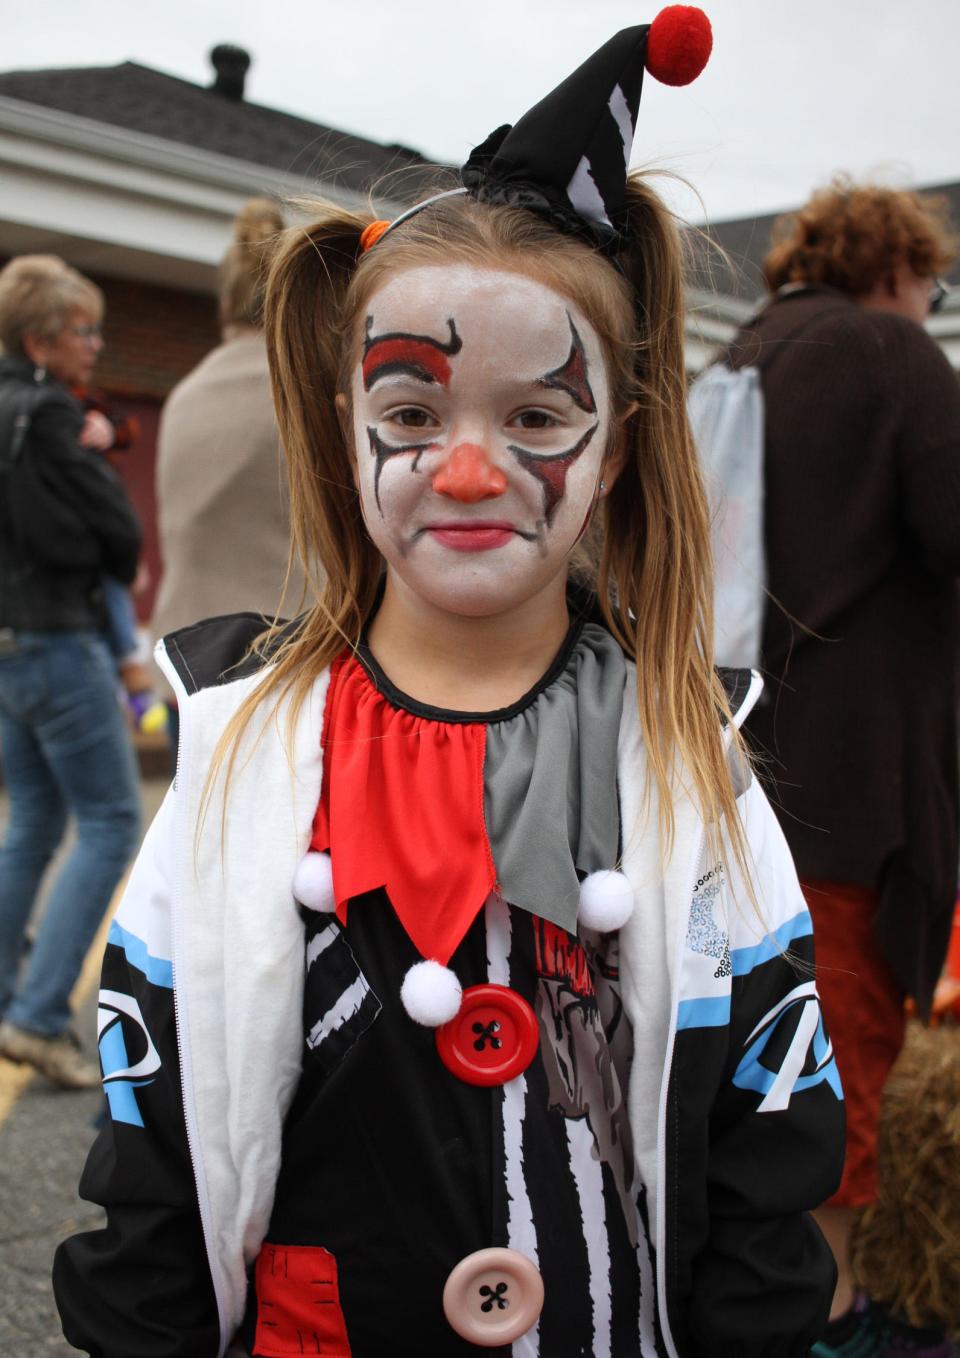 Lily Rivers came to the 2021 Portland fall festival dressed as a sad clown.